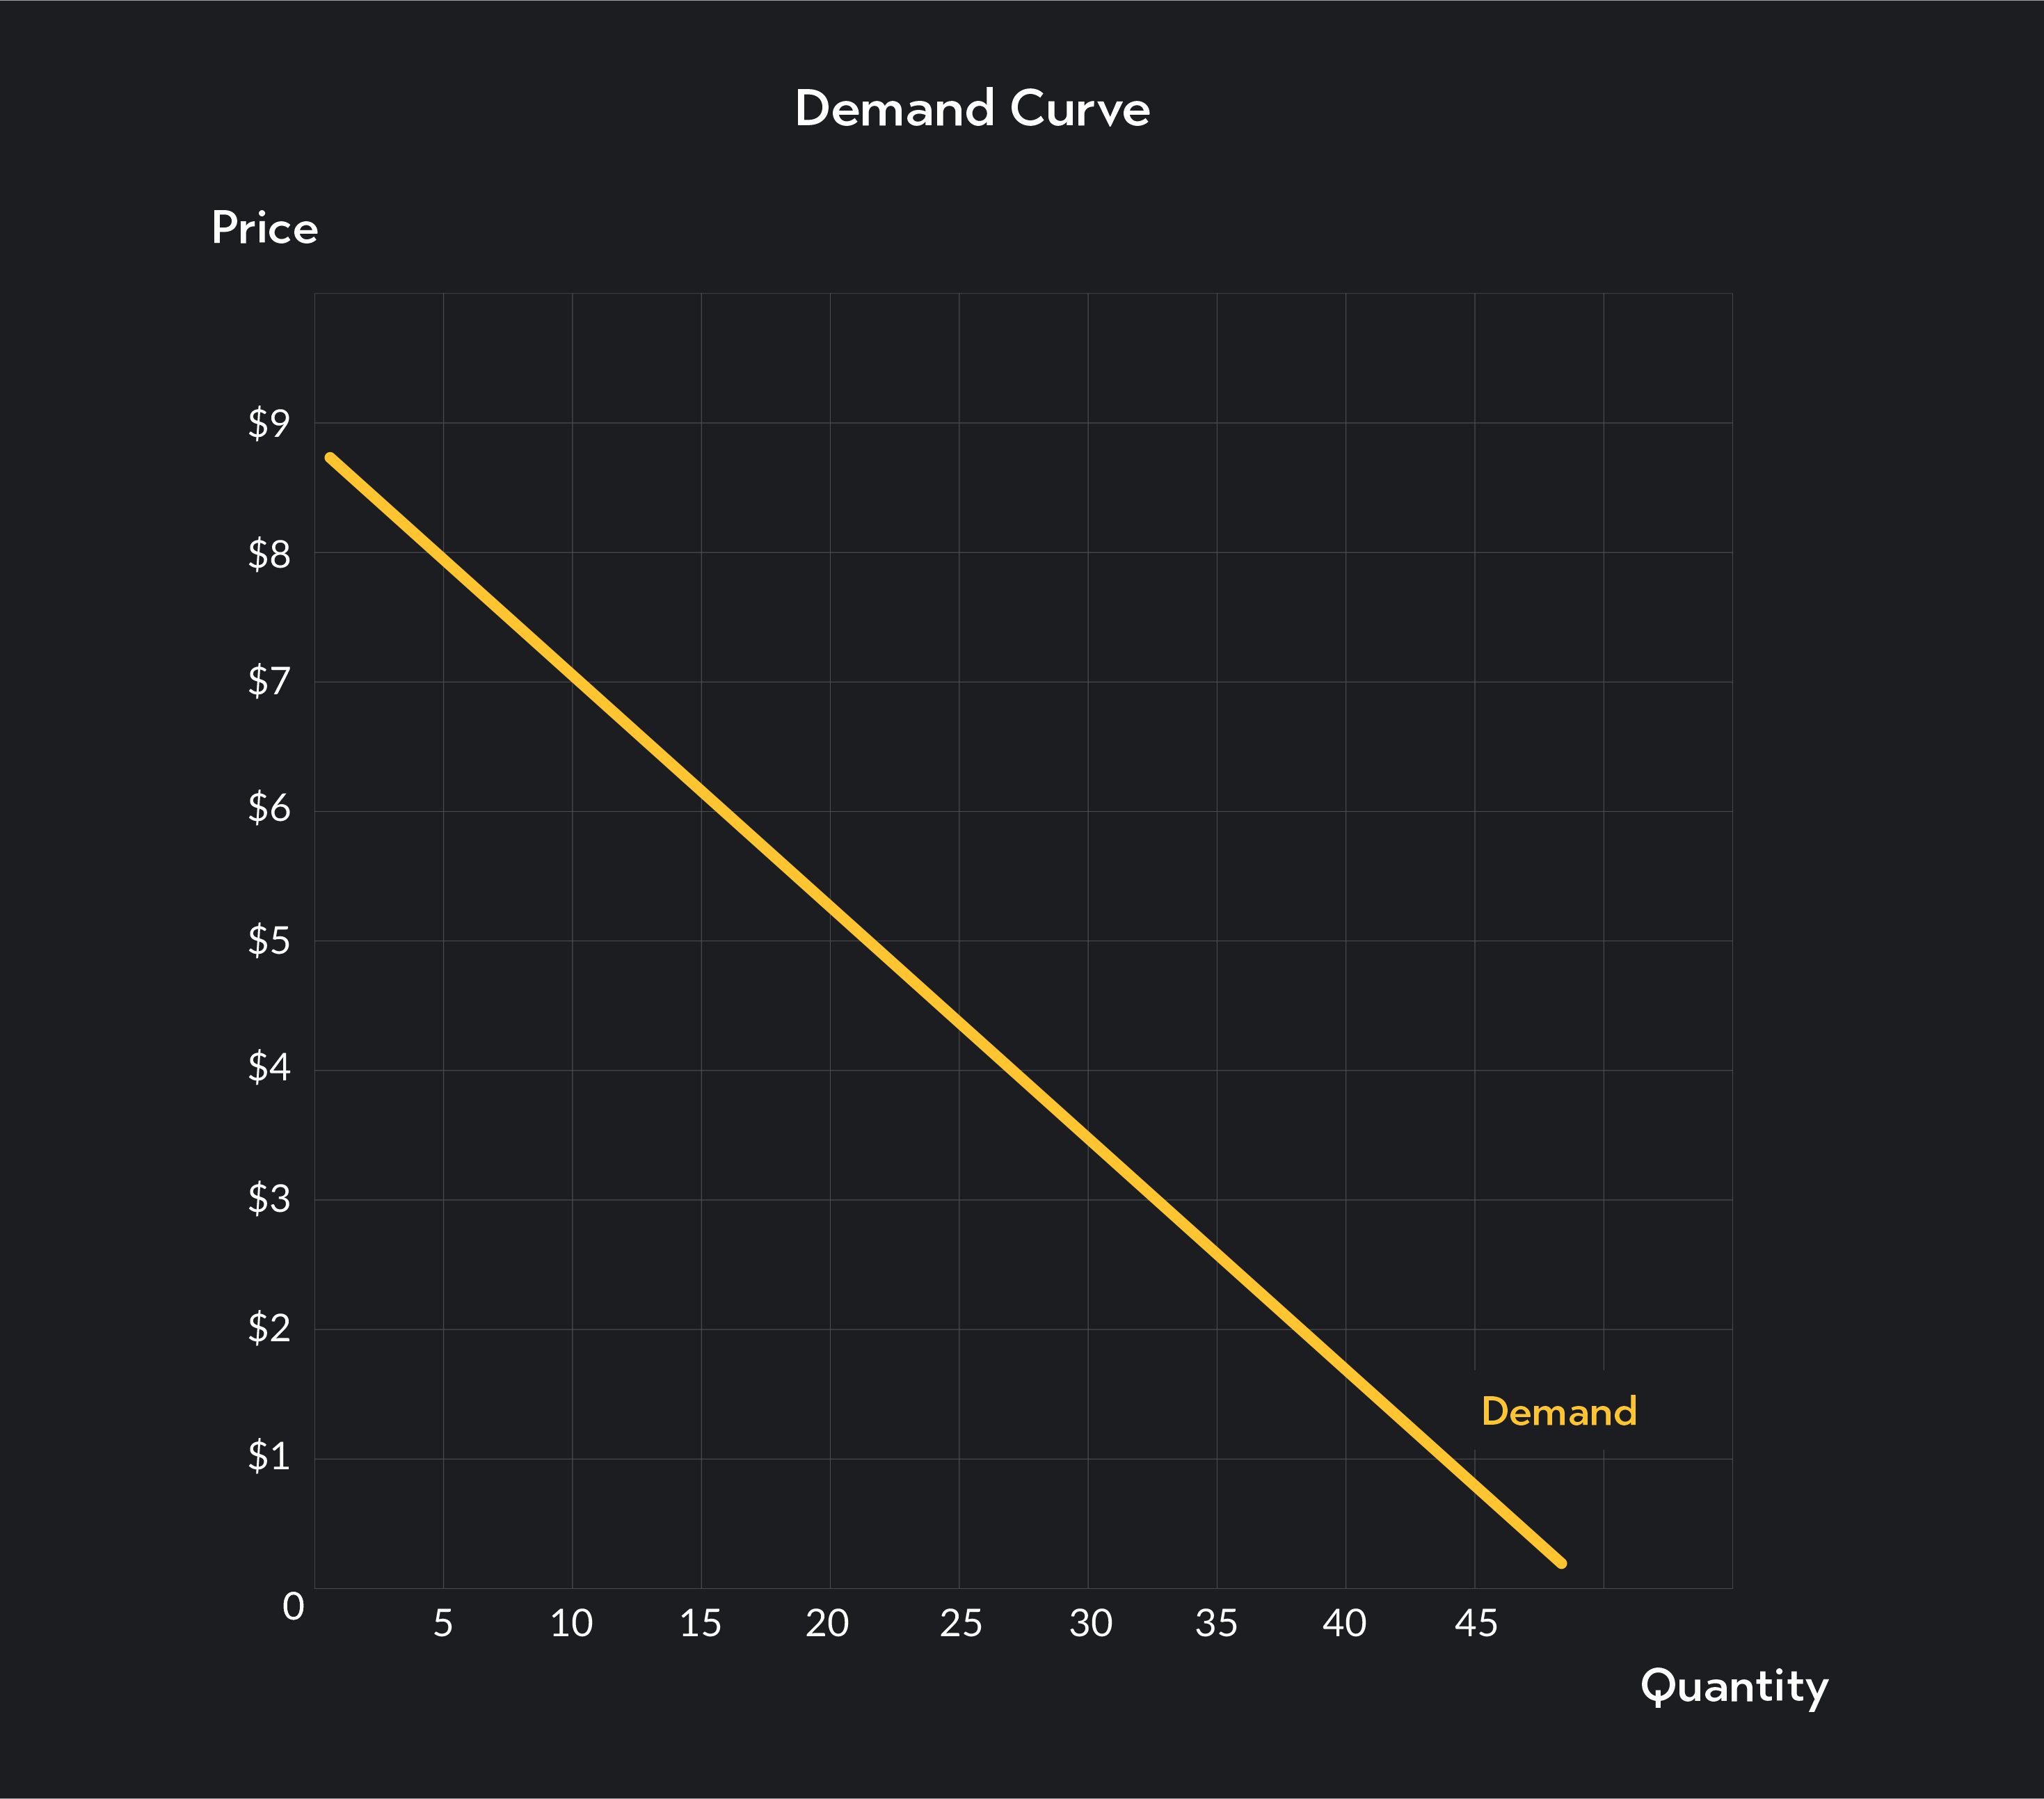 Graph showing each point along the demand curve associated with a particular quantity demanded